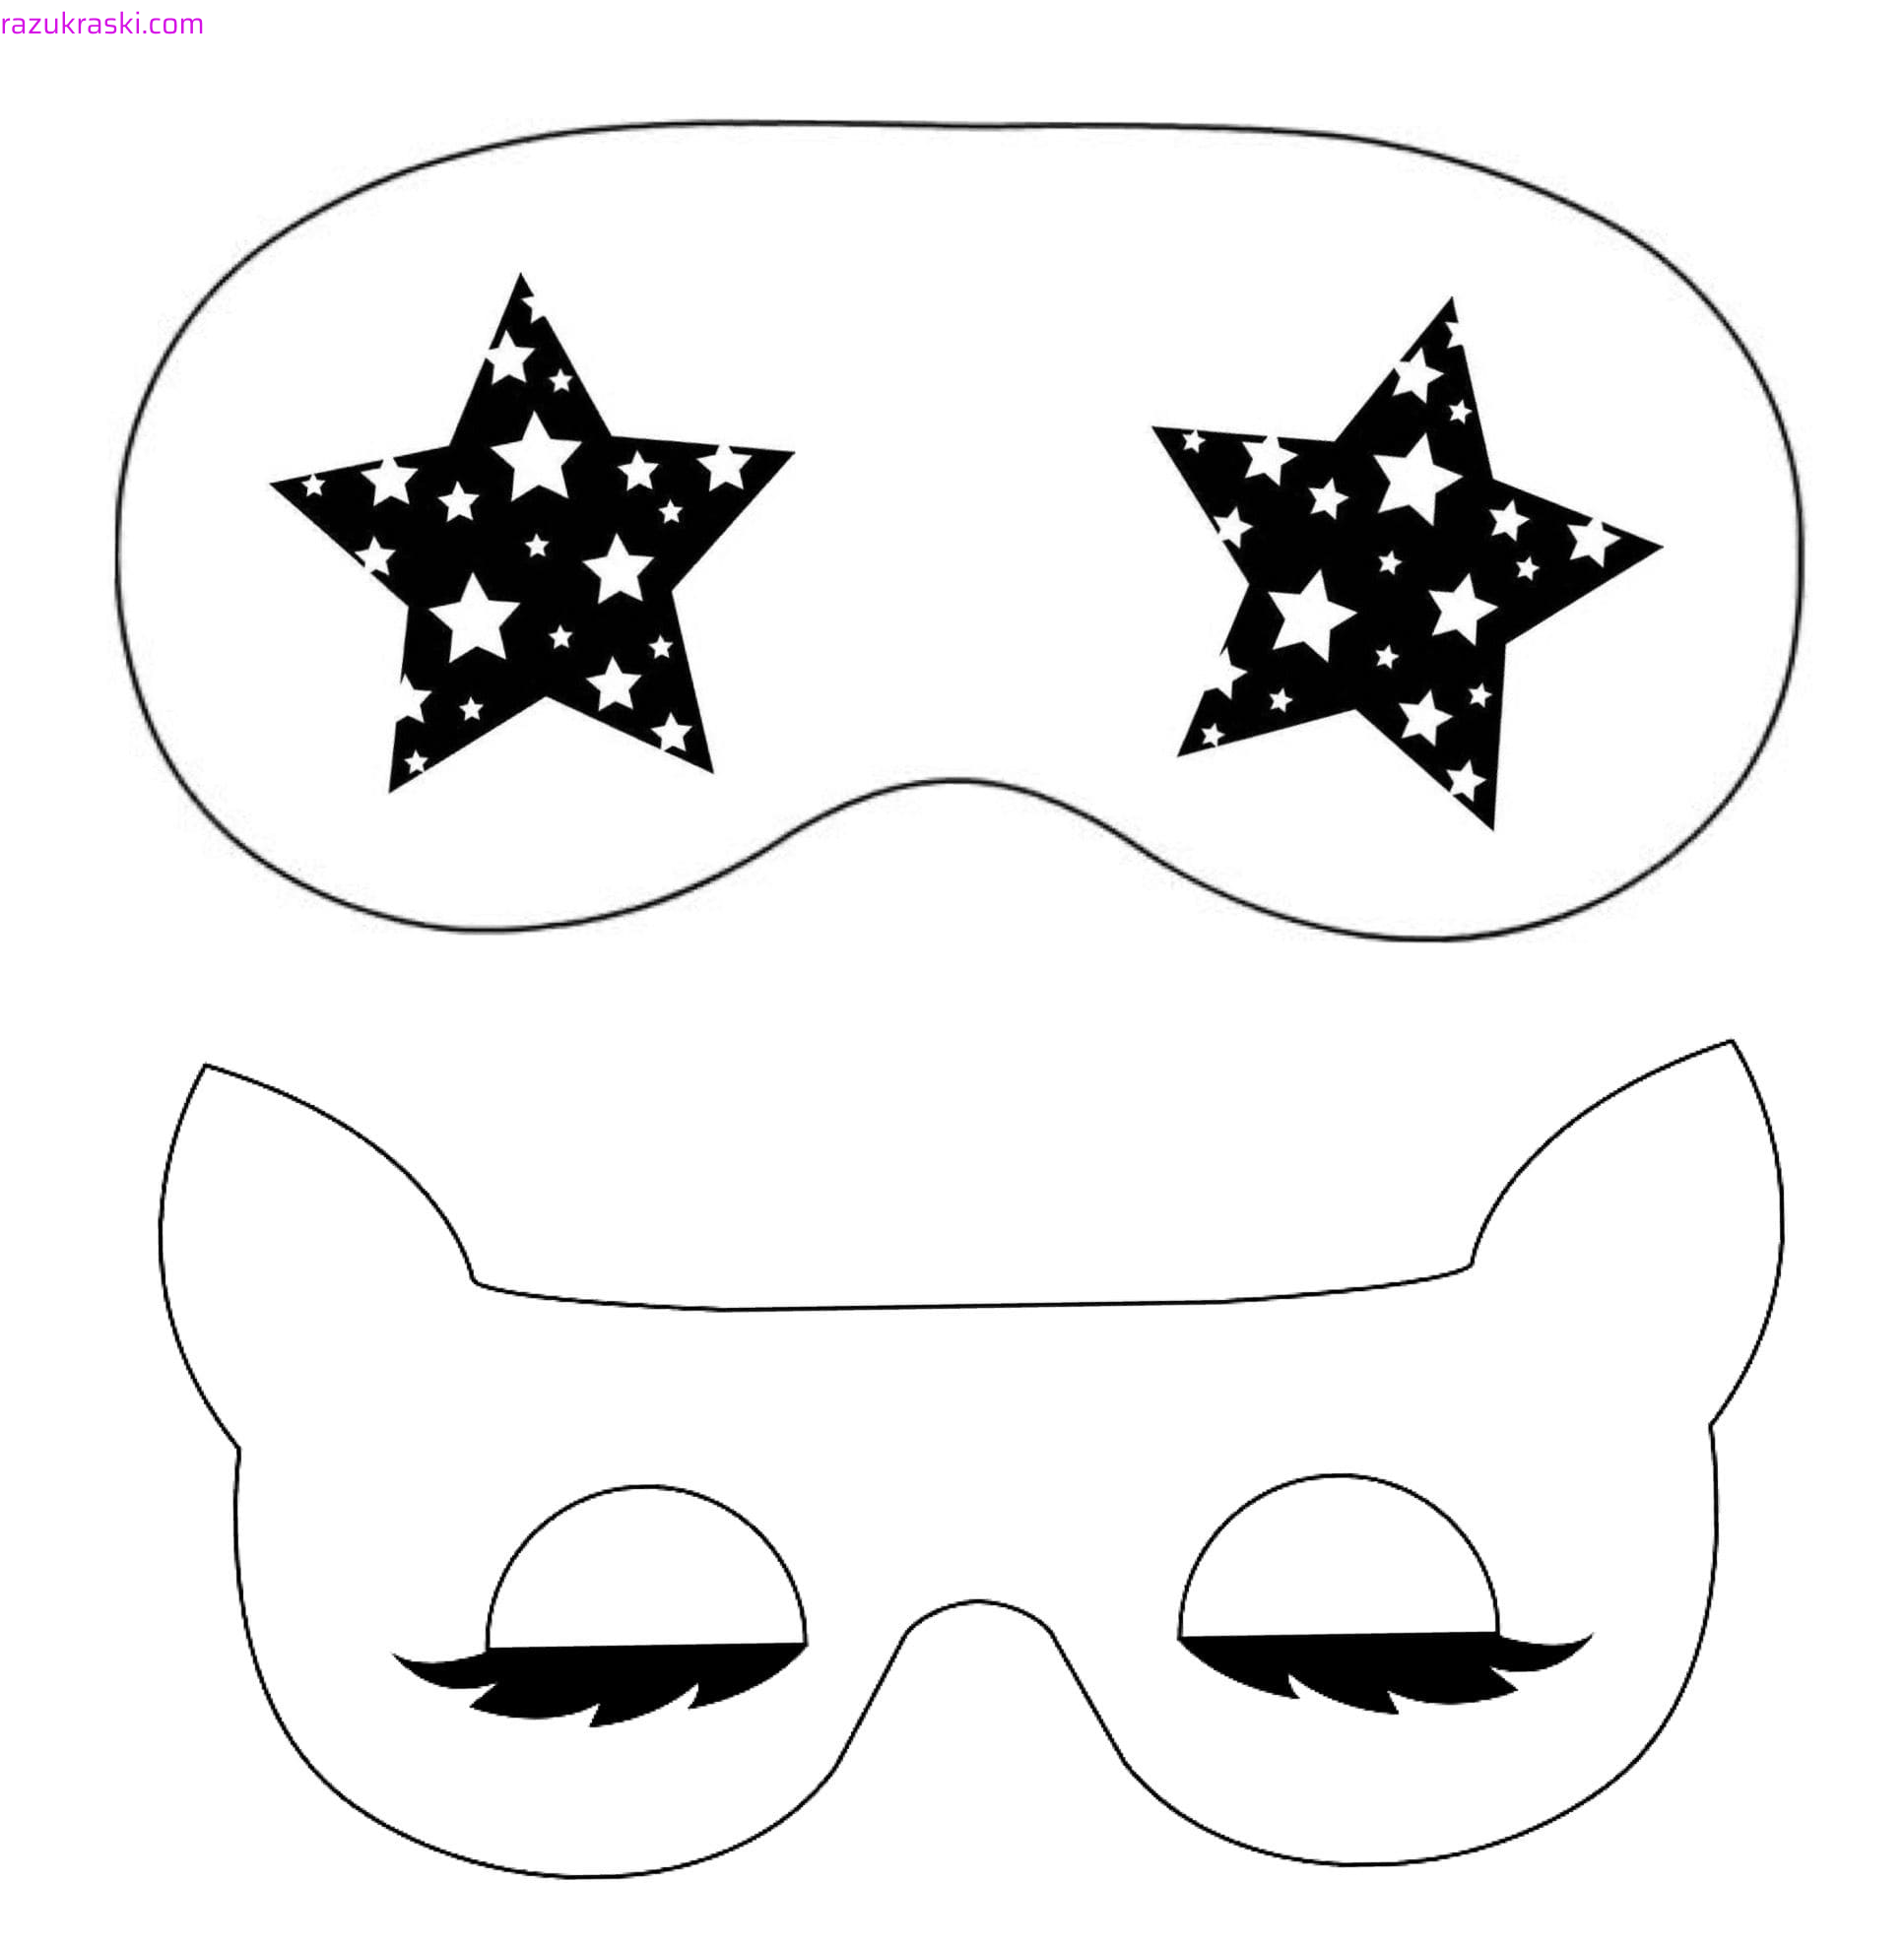 Coloring page Clothing for Lalafanfan Paper Mask for Lalafanfan